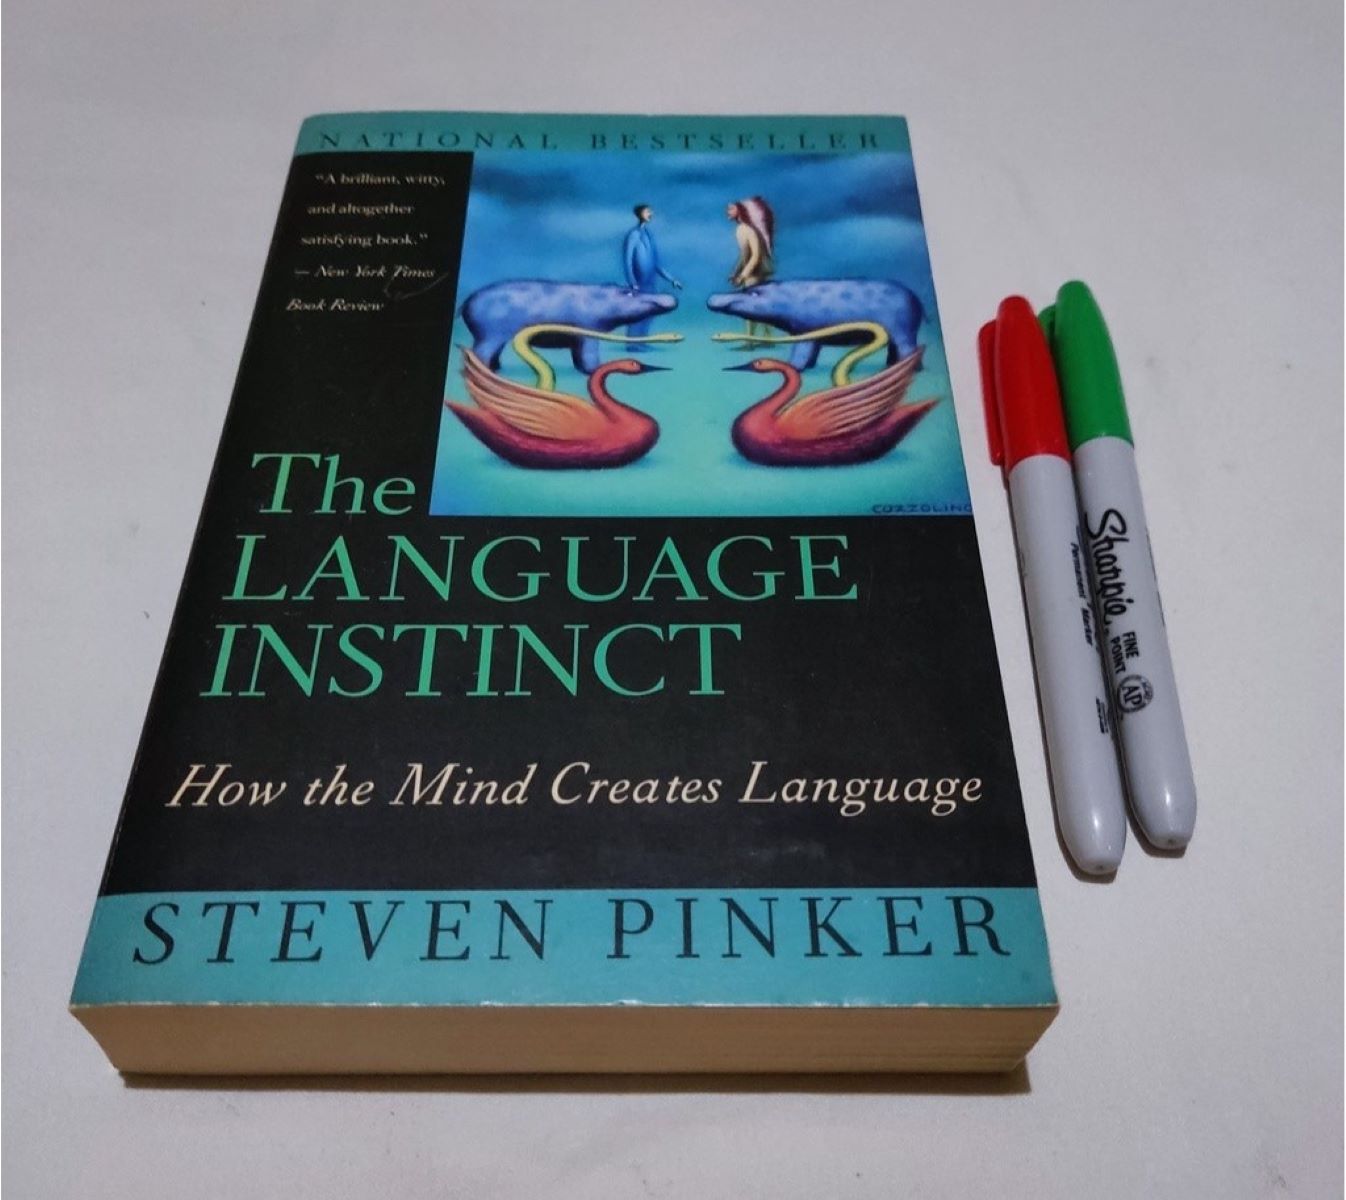 16-astounding-facts-about-the-language-instinct-steven-pinker